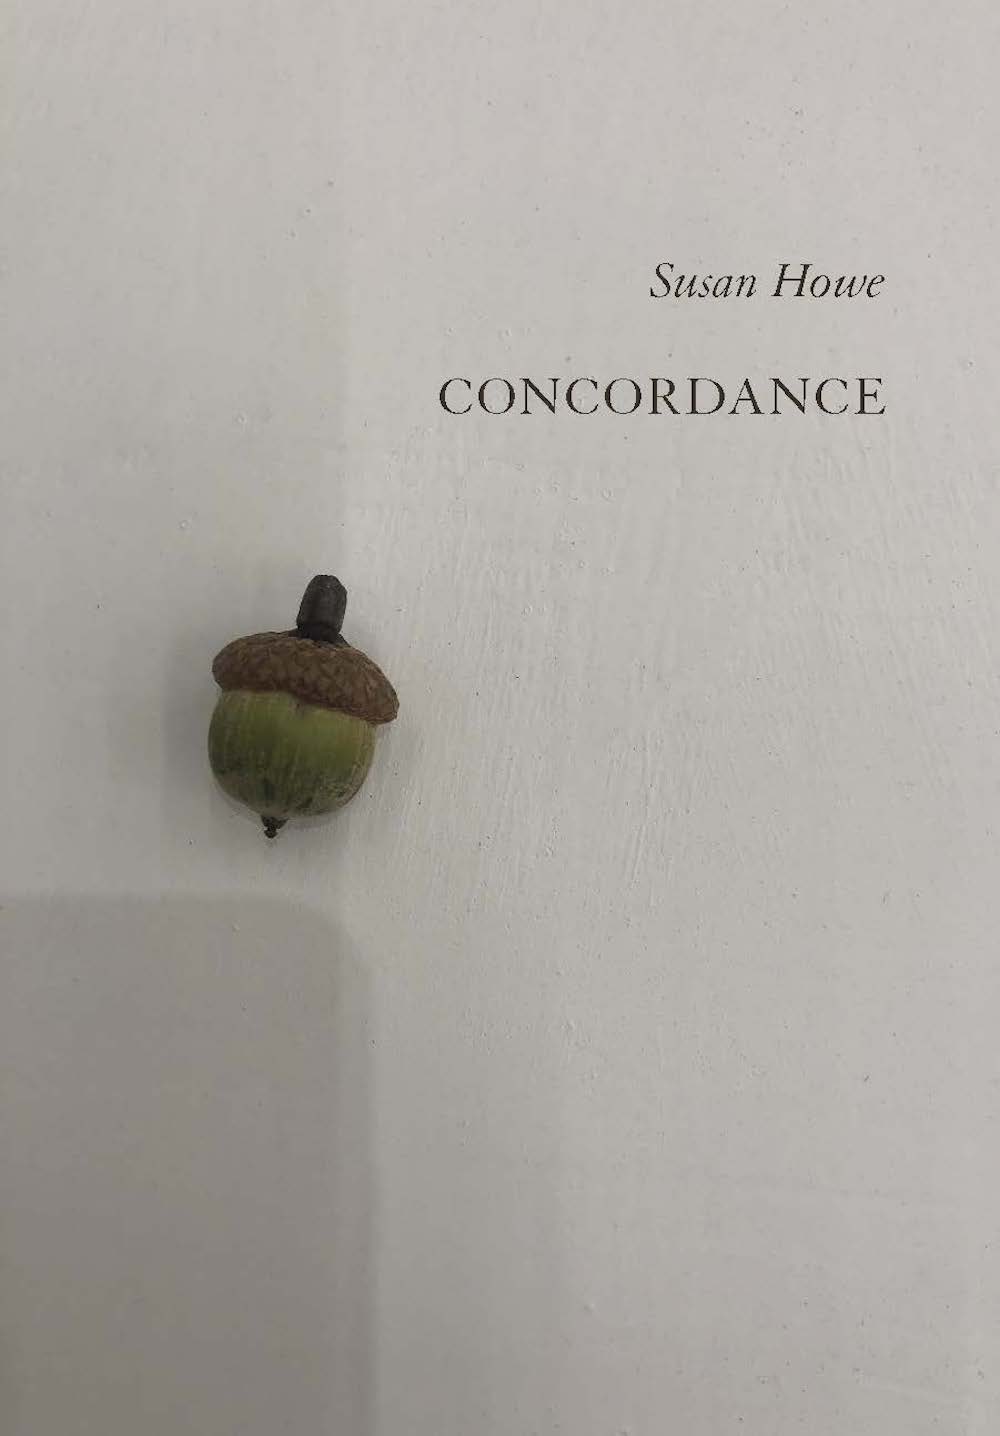 Susan Howe: Concordance (2020, New Directions)